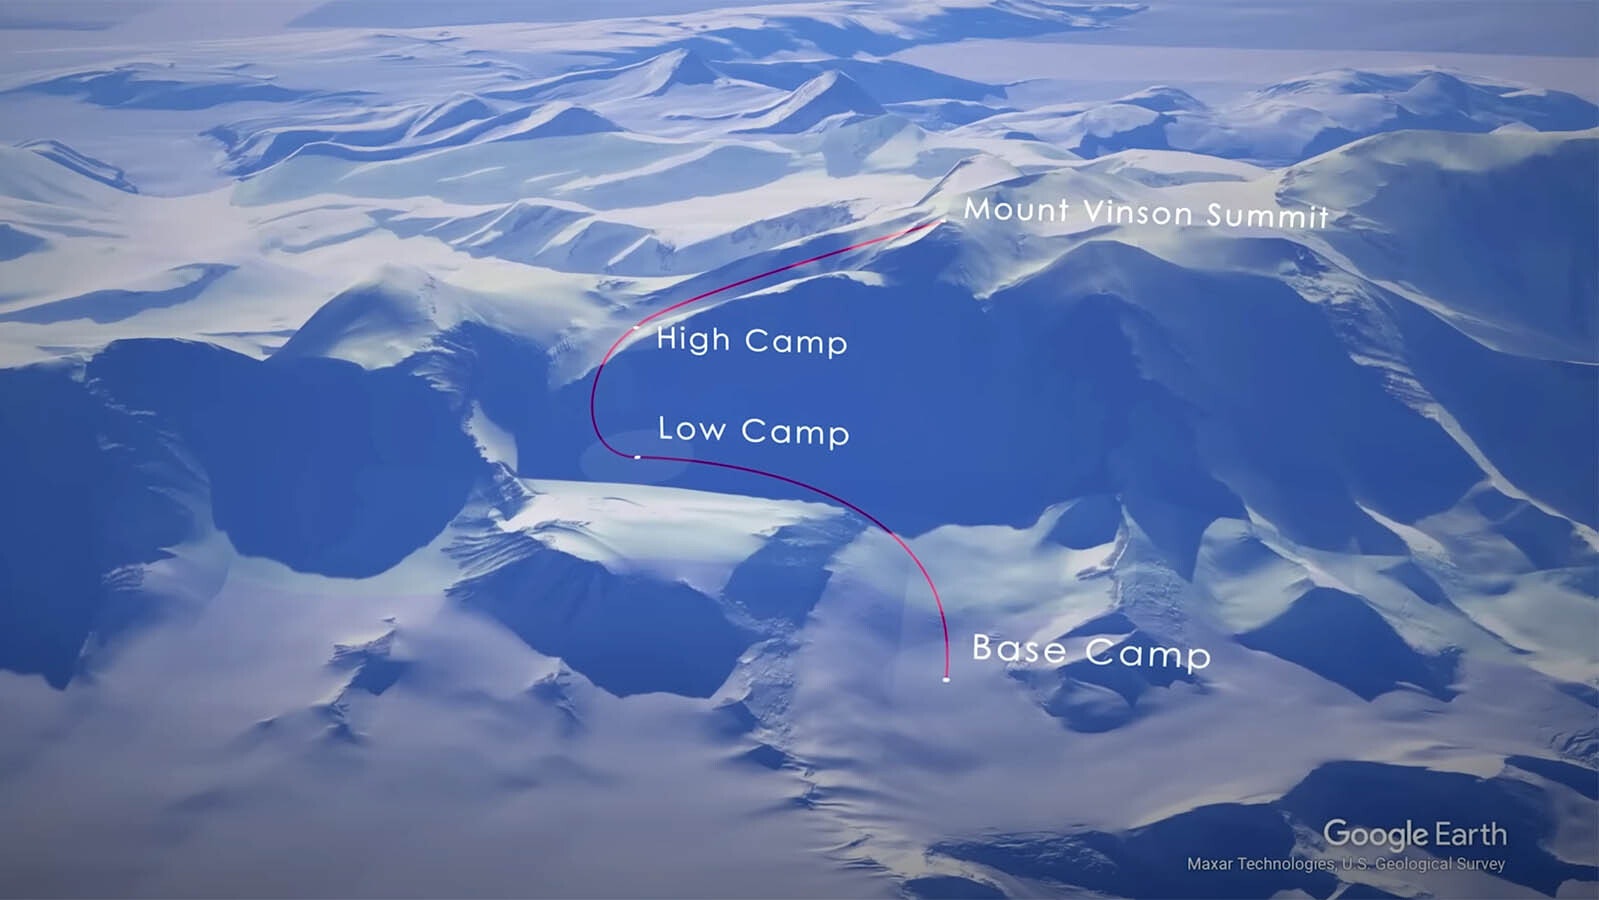 There are several camps along the way to summiting Mount Vinson.